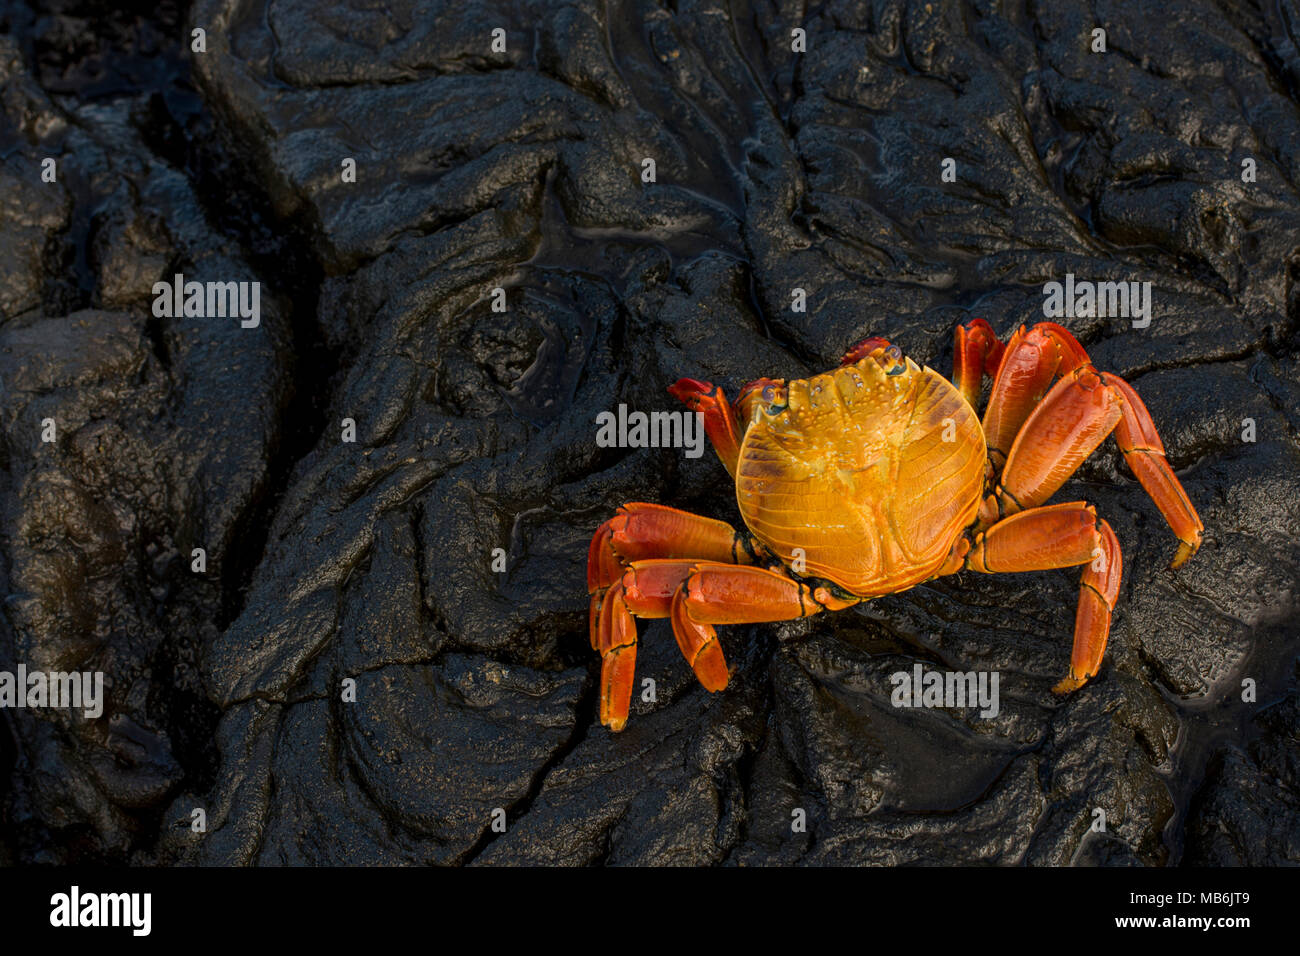 A sally lightfoot crab from the Galapagos islands, these charismatic crabs are a constant presence on the rocky coastline of the Galapagos islands. Stock Photo